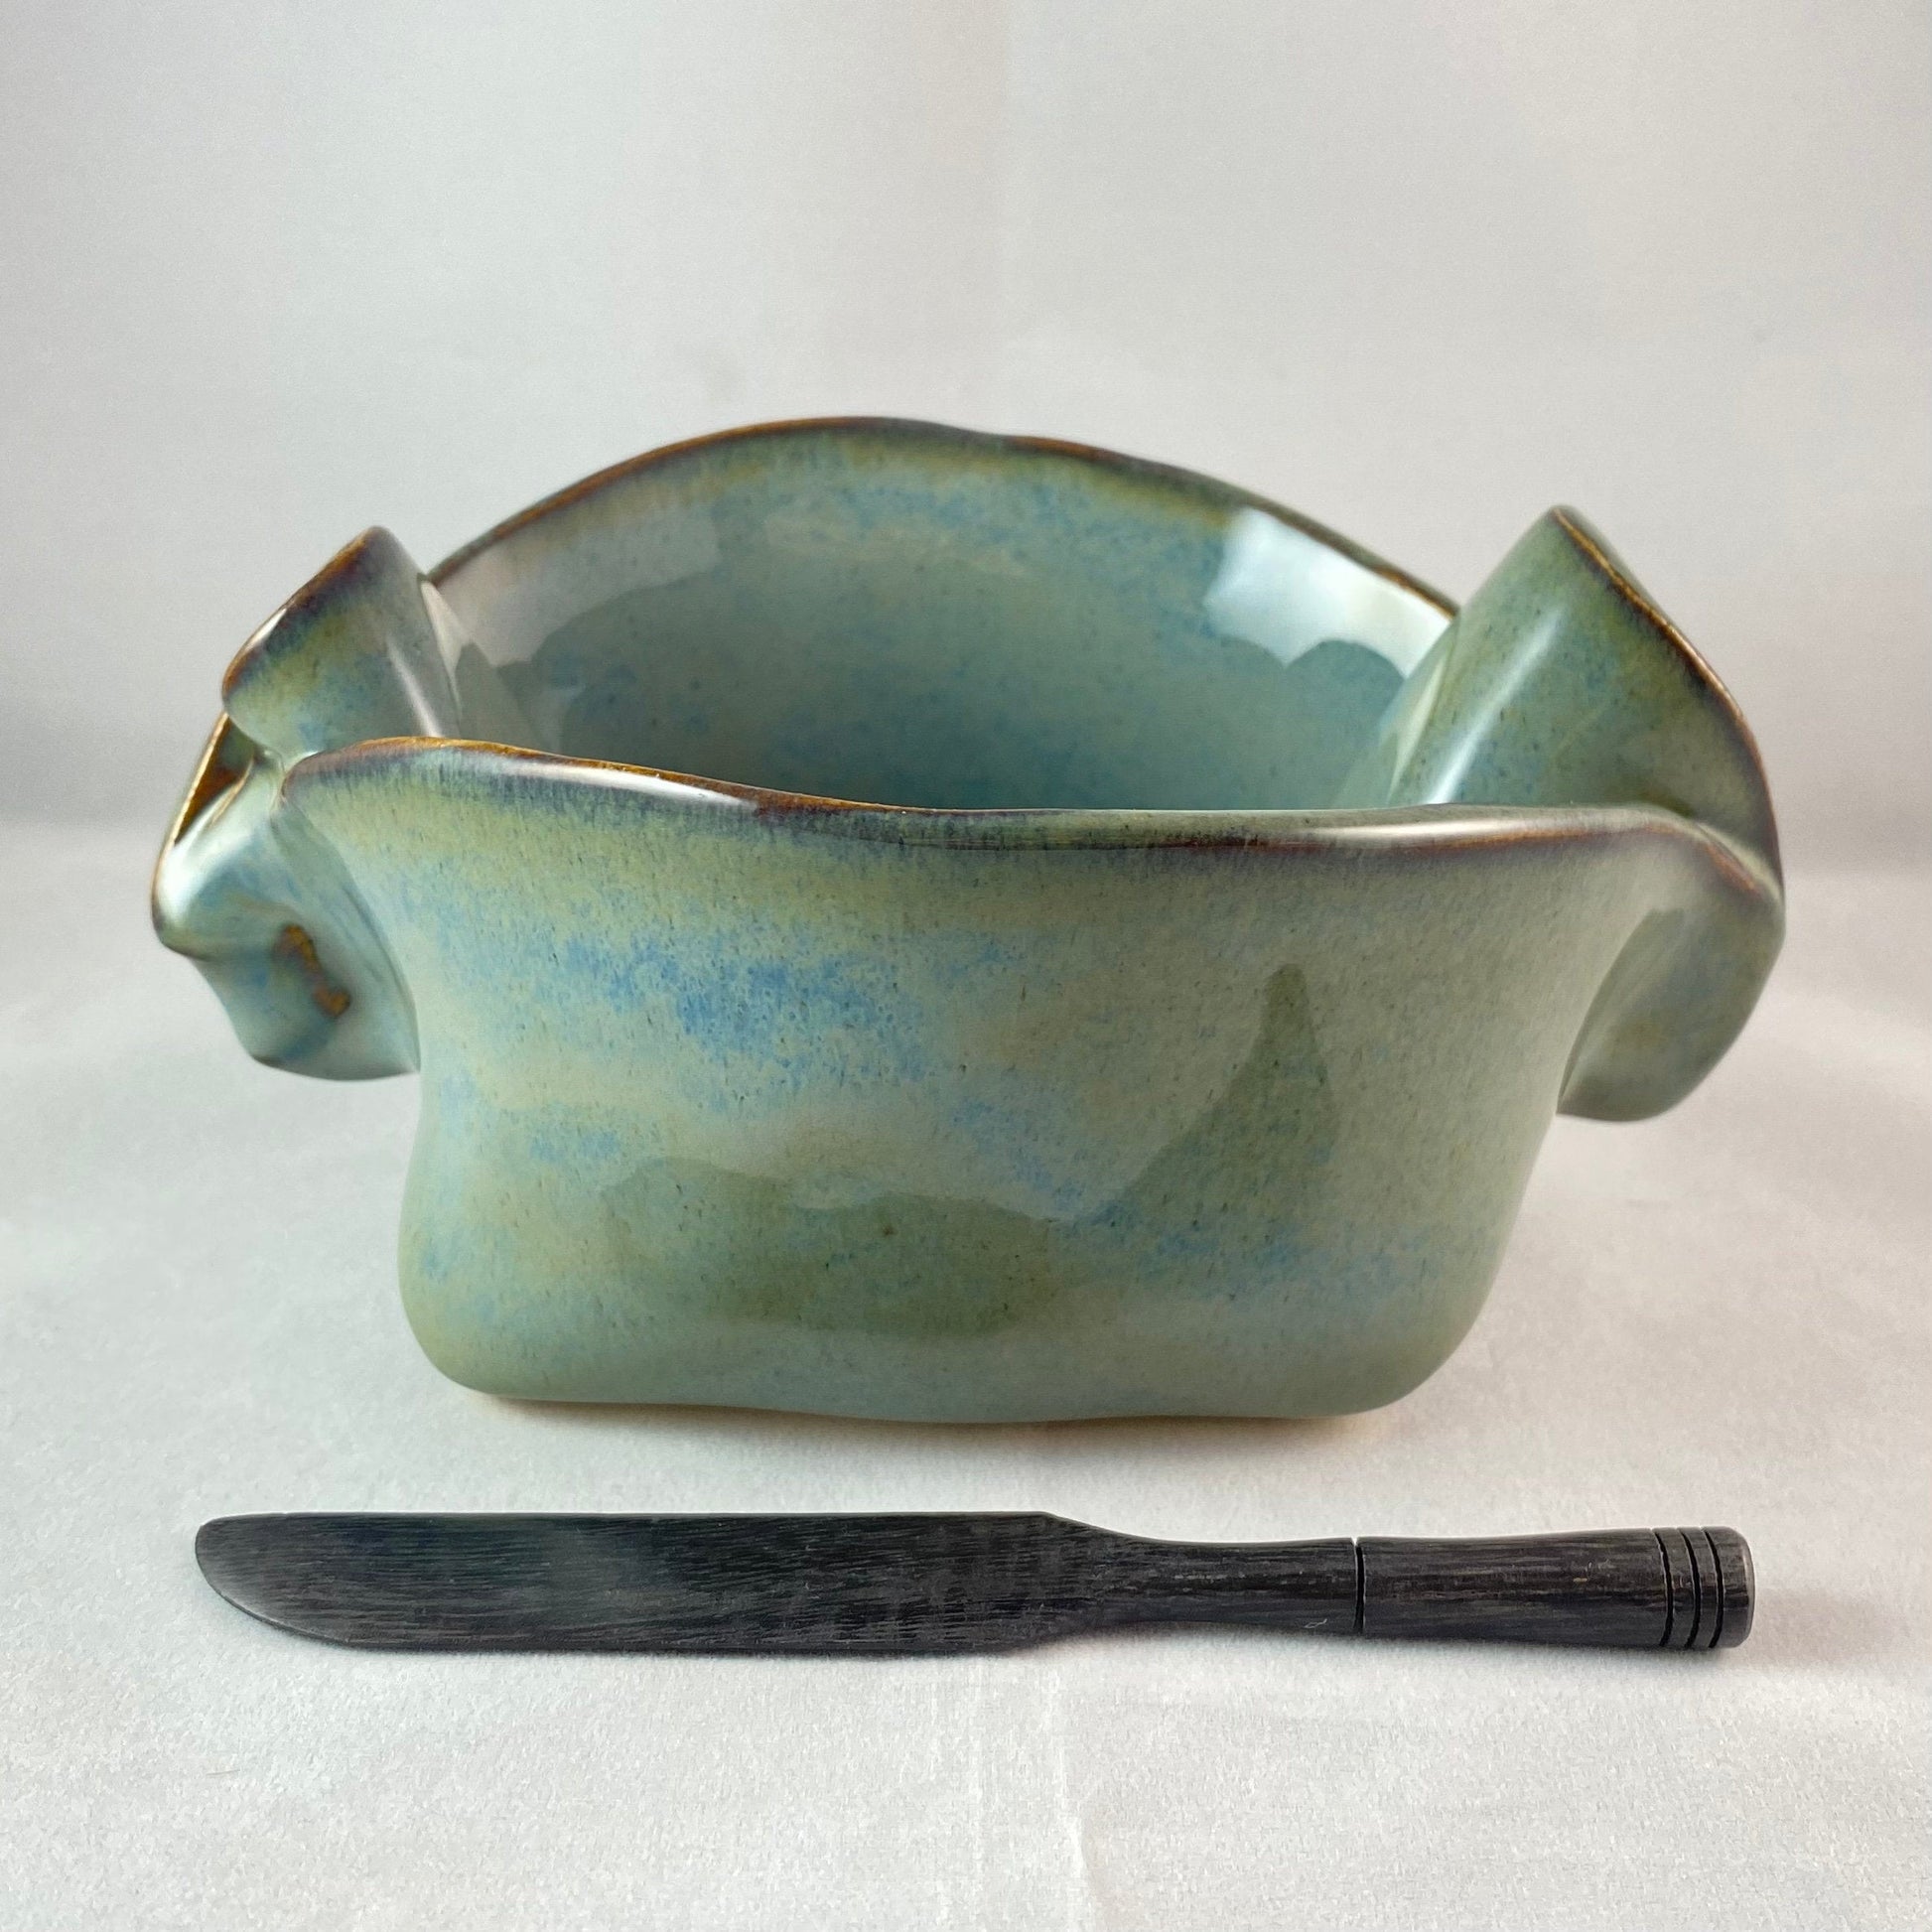 Handmade Light Blue Dish with Knife, Functional and Decorative Pottery